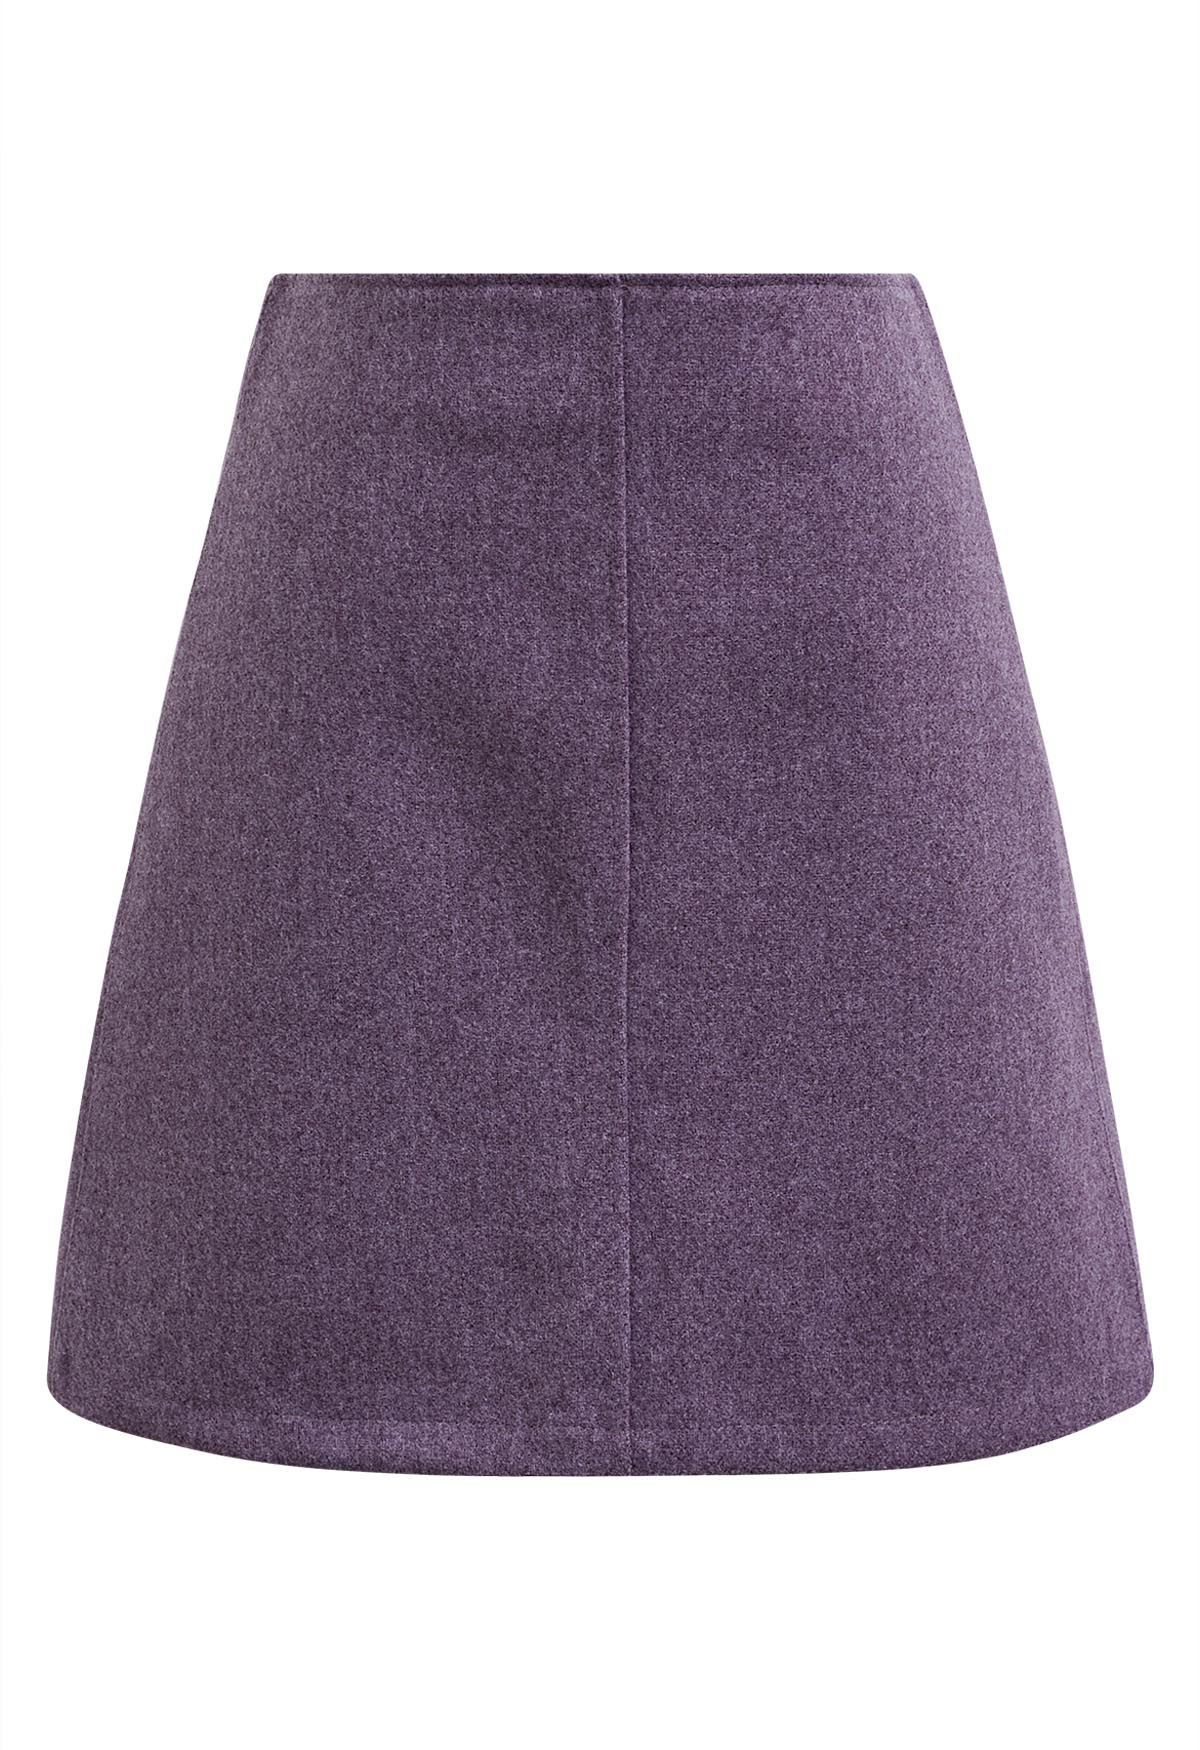 Snazzy Middle Seam Mini Bud Skirt